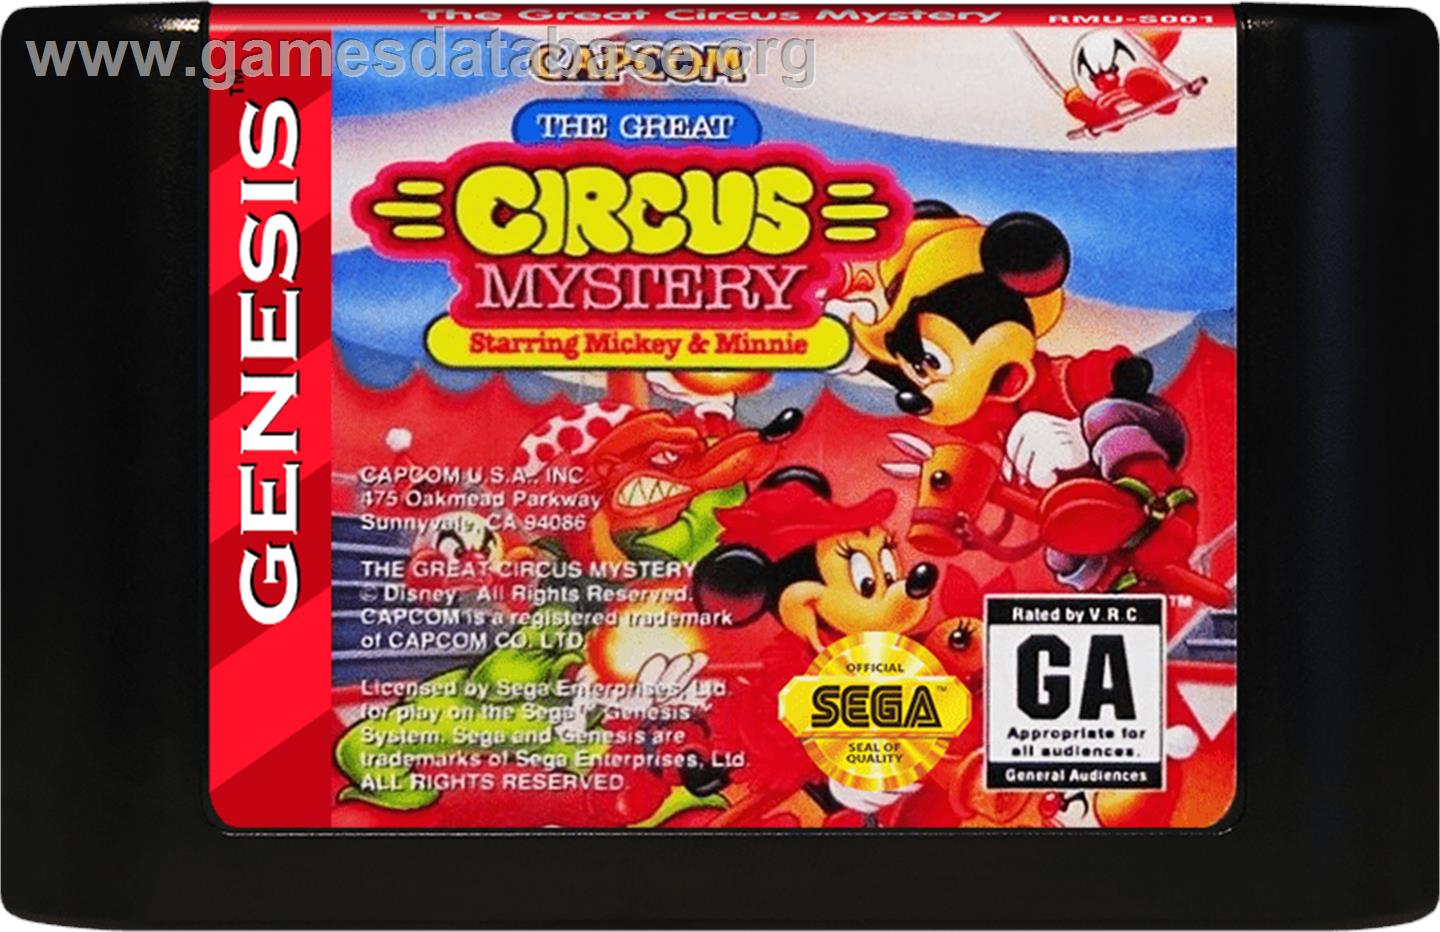 Great Circus Mystery, The - starring Mickey and Minnie Mouse - Sega Genesis - Artwork - Cartridge